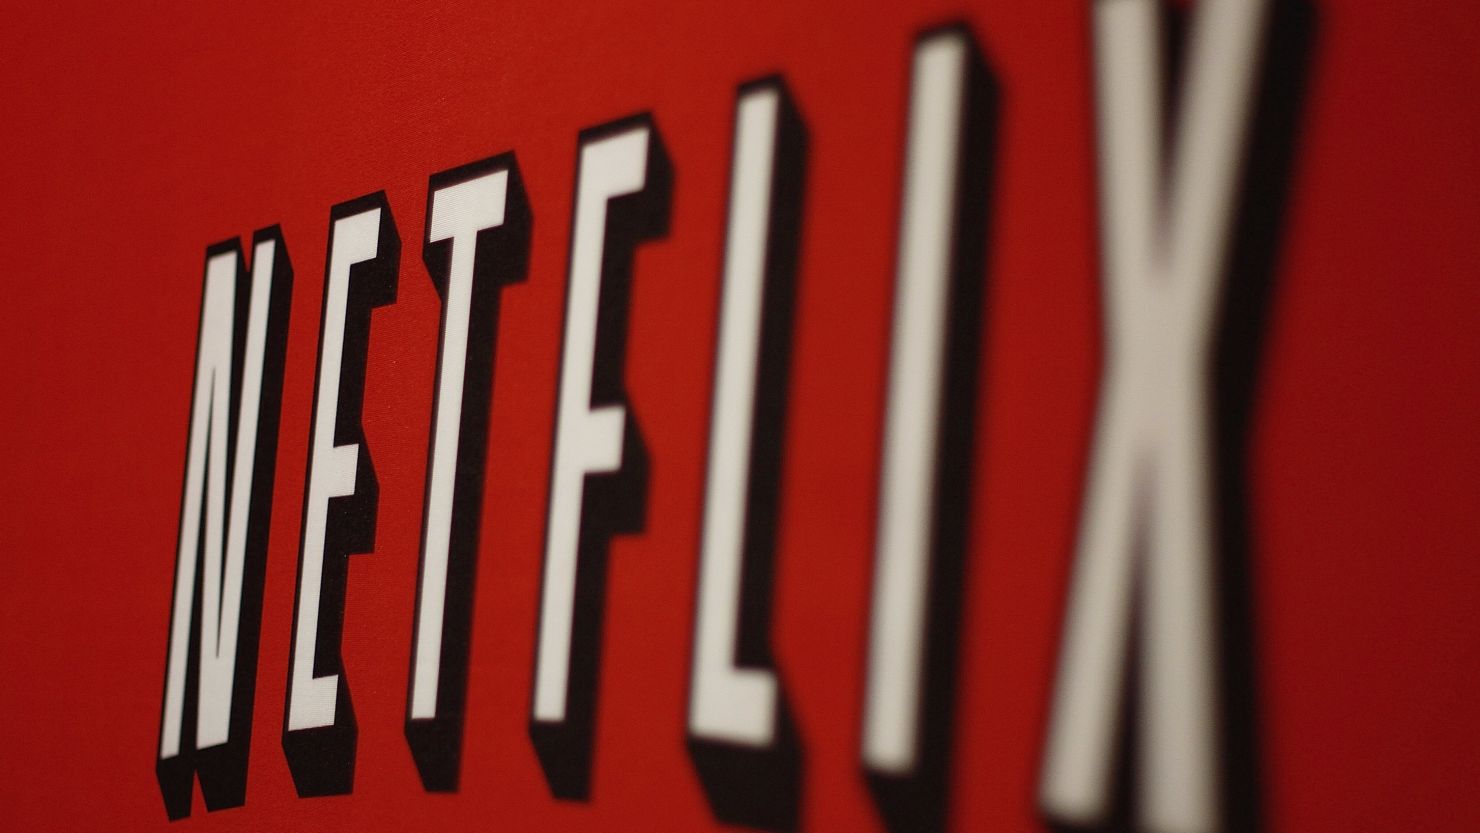 Netflix's short-lived plan to split itself into two services didn't go over so well this year. Qwikster?